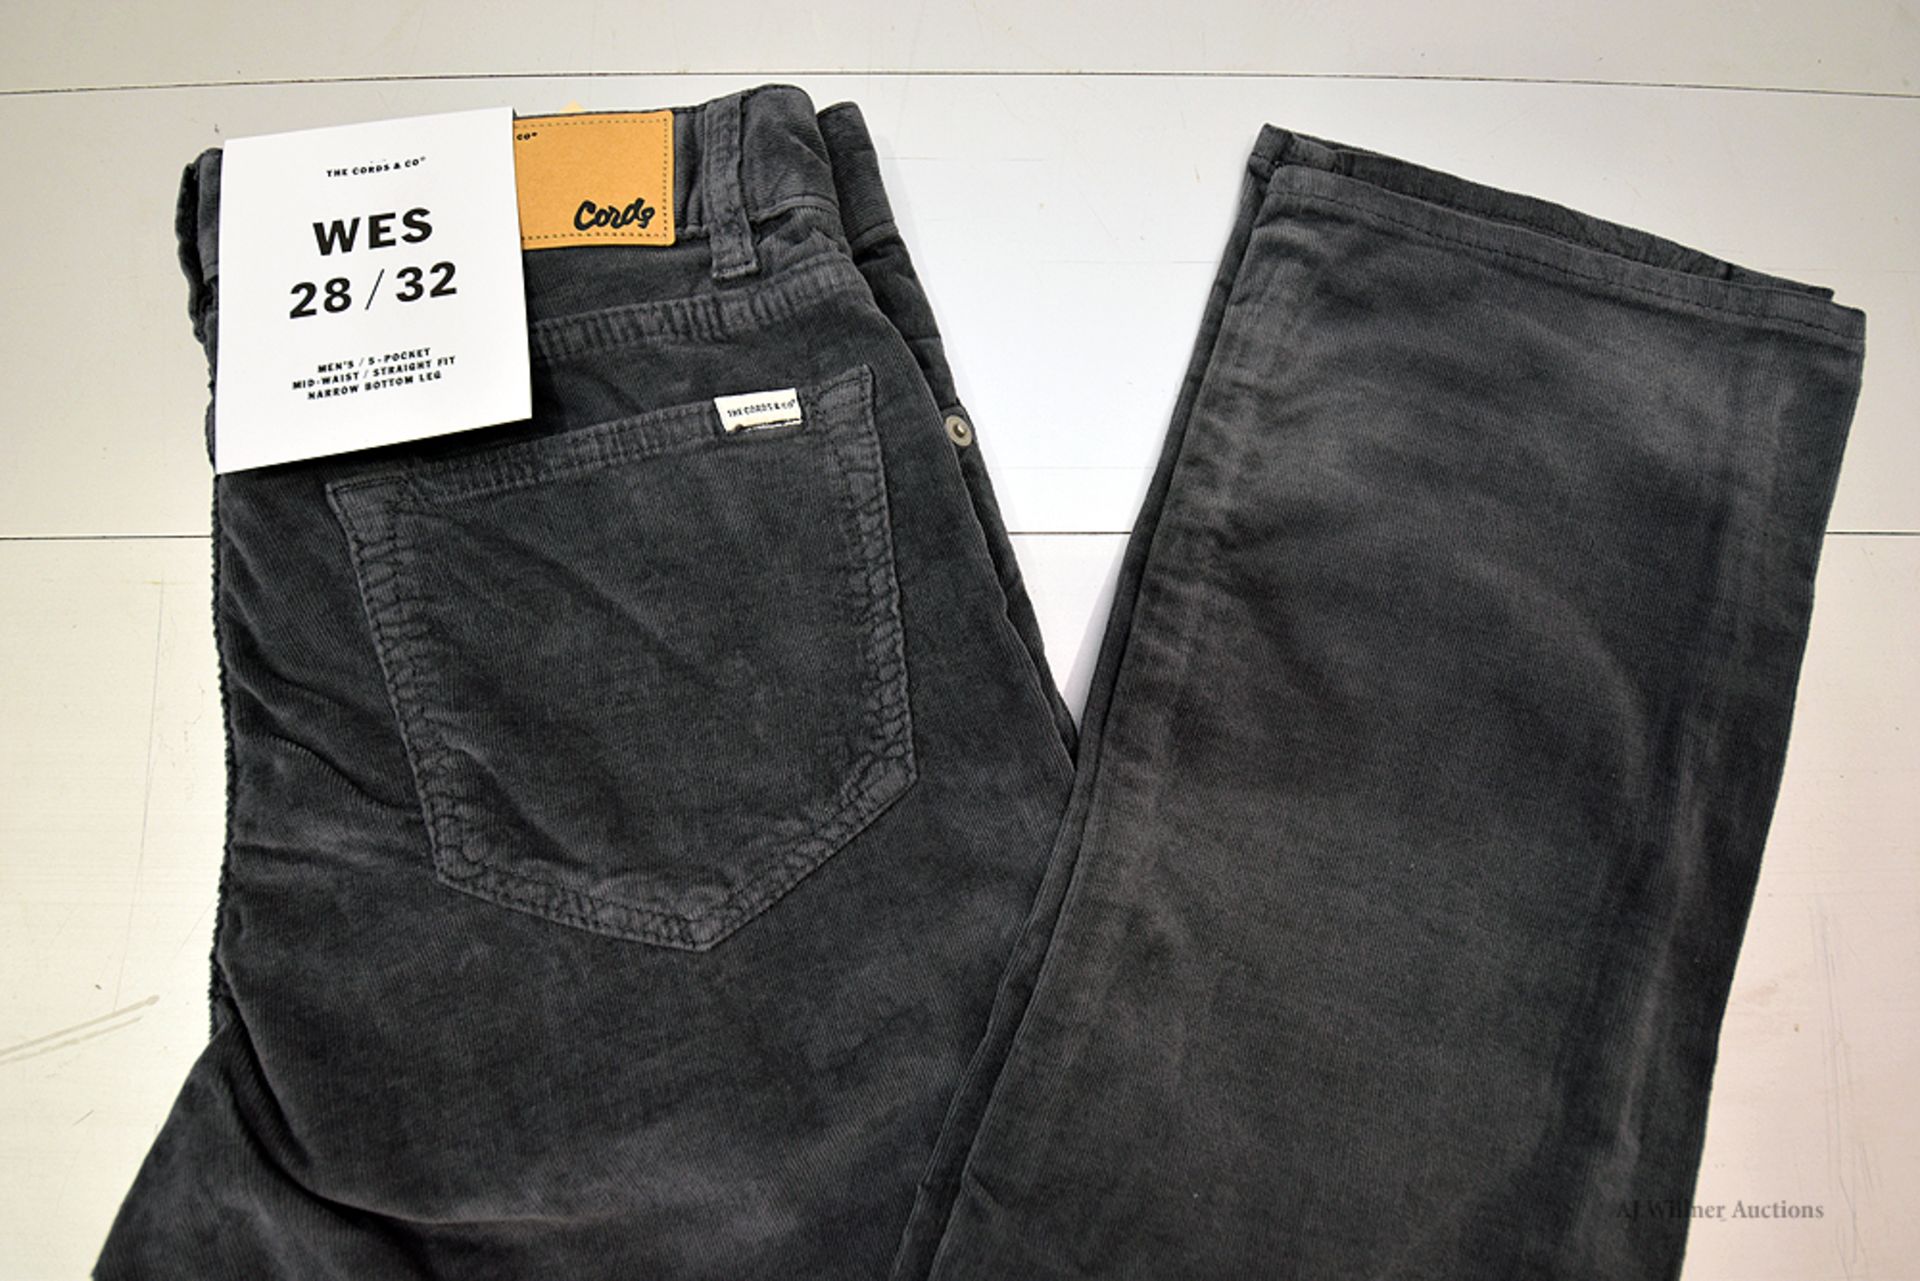 The Cords & Co. "Wes" Men's/High-Waist/ Straight Fit/ Narrow Bottom MSRP $160 - Image 4 of 5